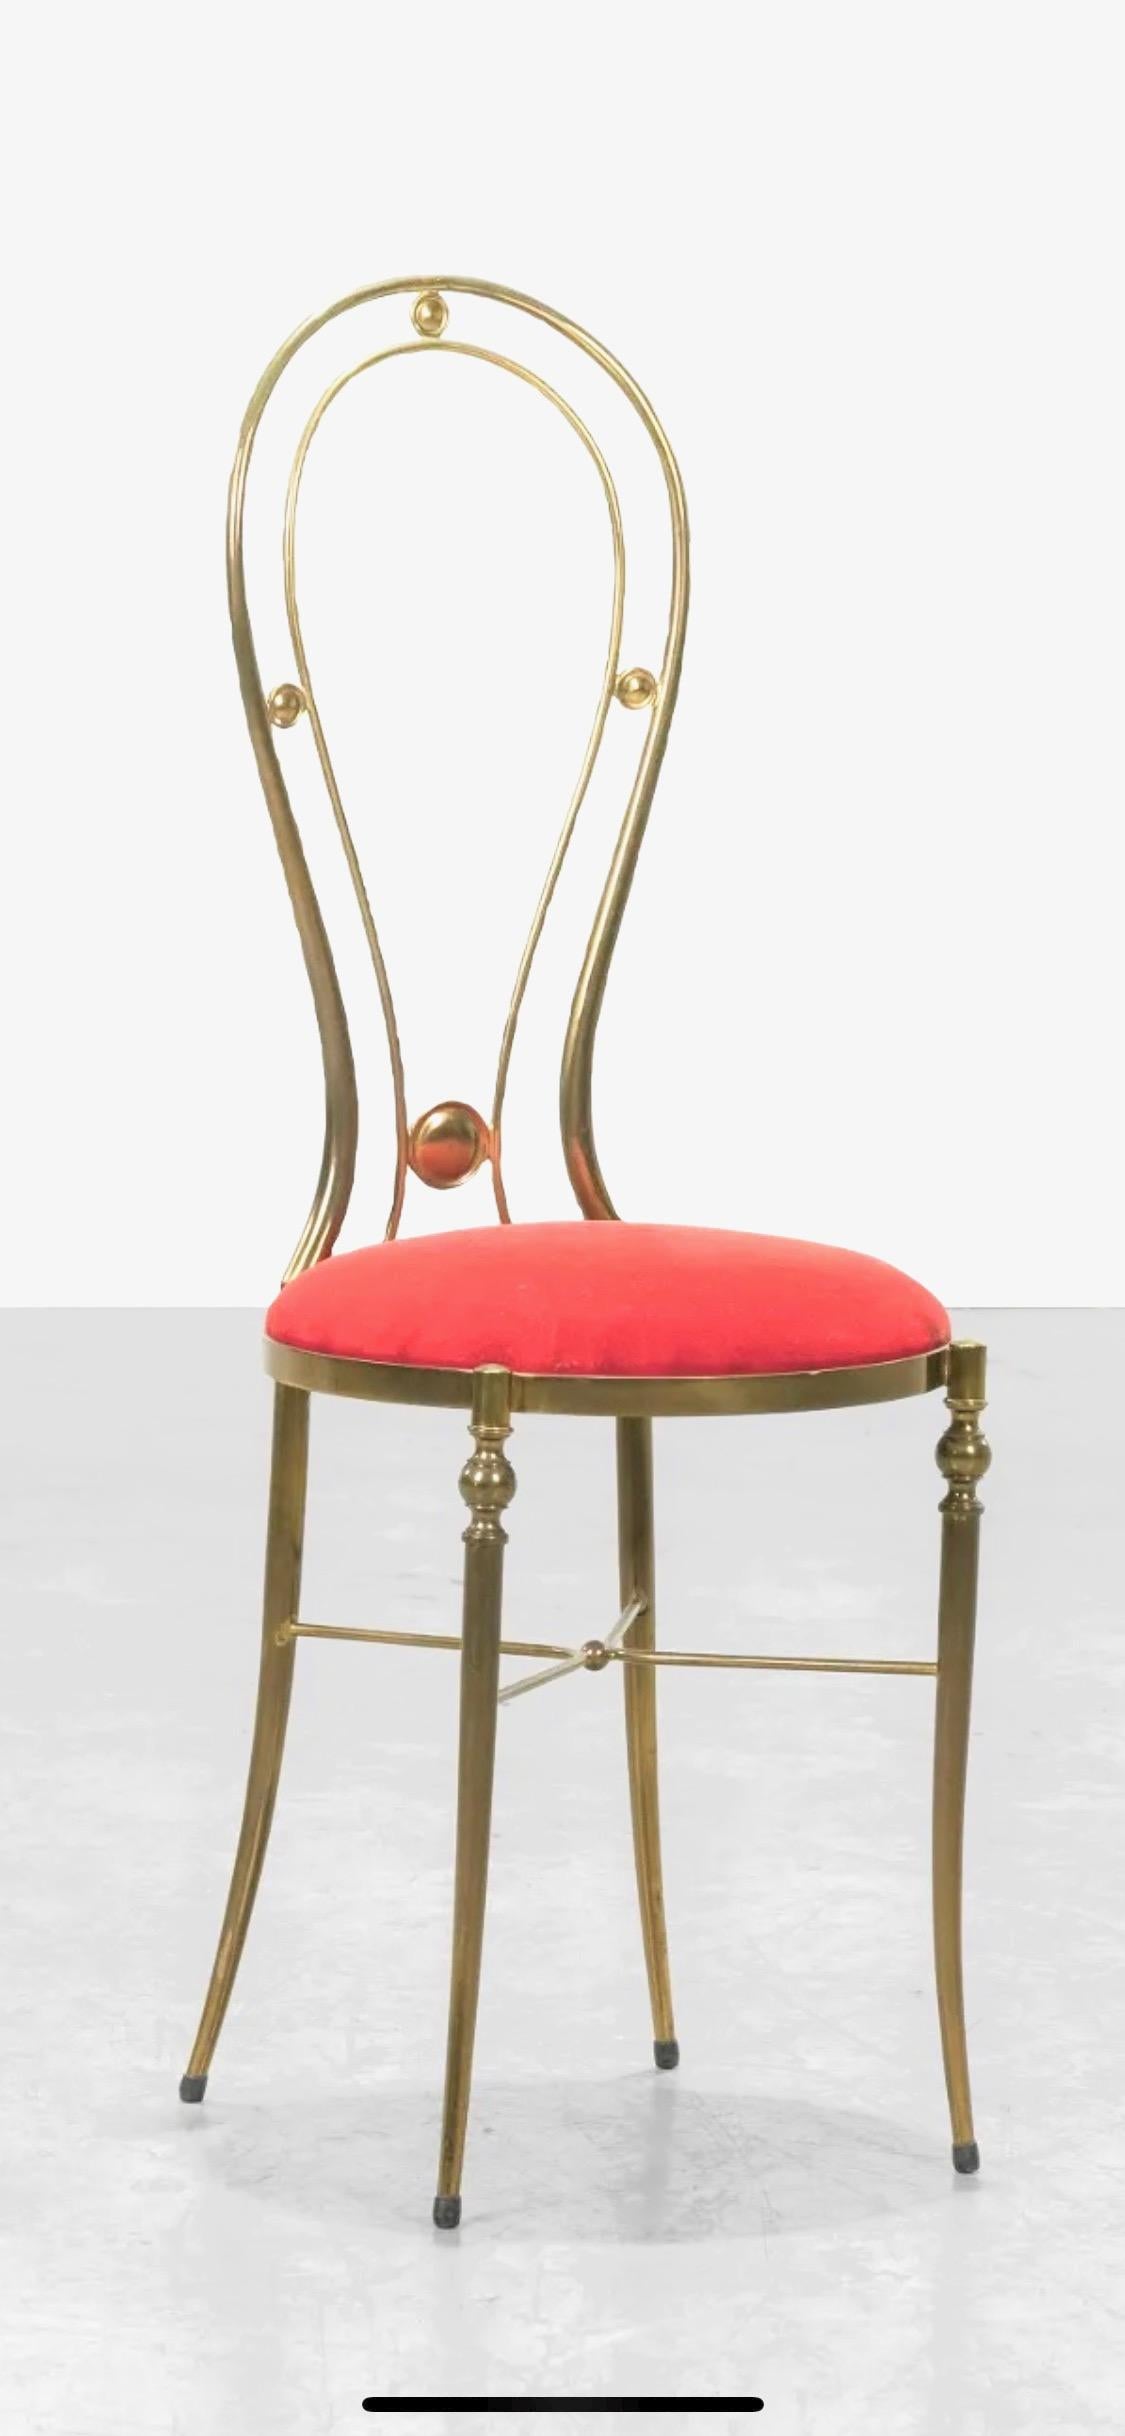 A vintage 1950's Italian brass Chiavari vanity chair with red velvet seat cover. 
No bends or dents. Almost like new condition with light patina. Uncommon form.